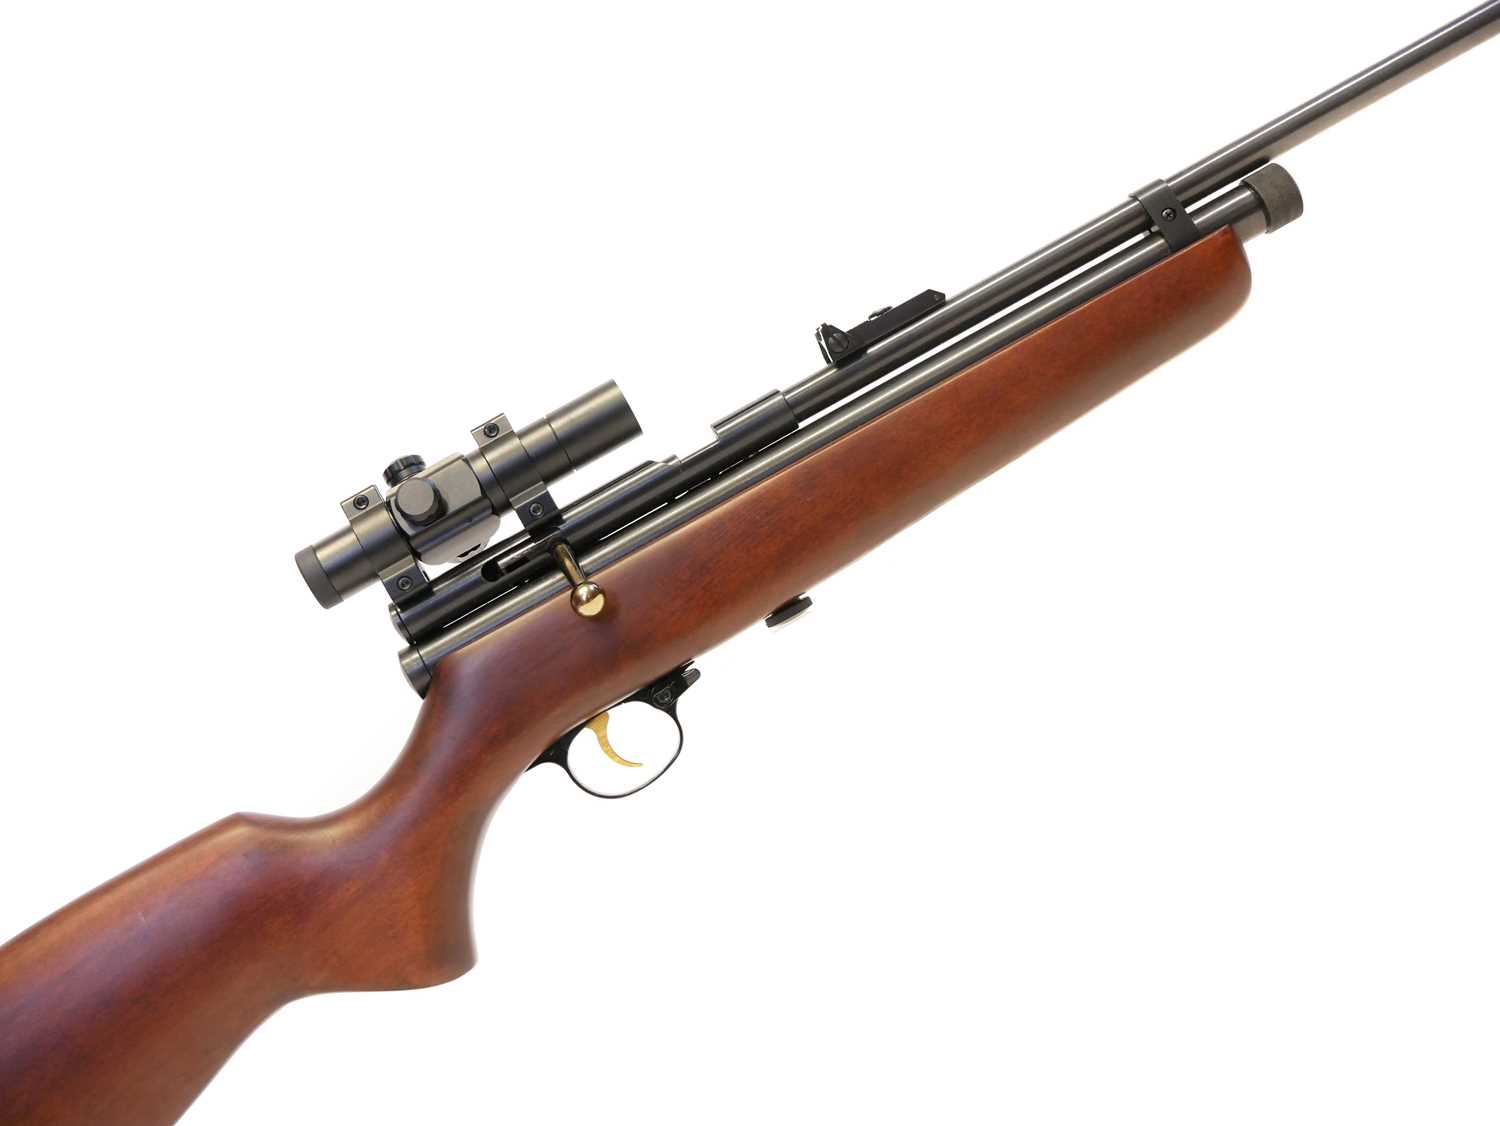 SMK QB78DL .22 CO2 air rifle, 29inch barrel including the fitted moderator, fitted with Hawke scope,